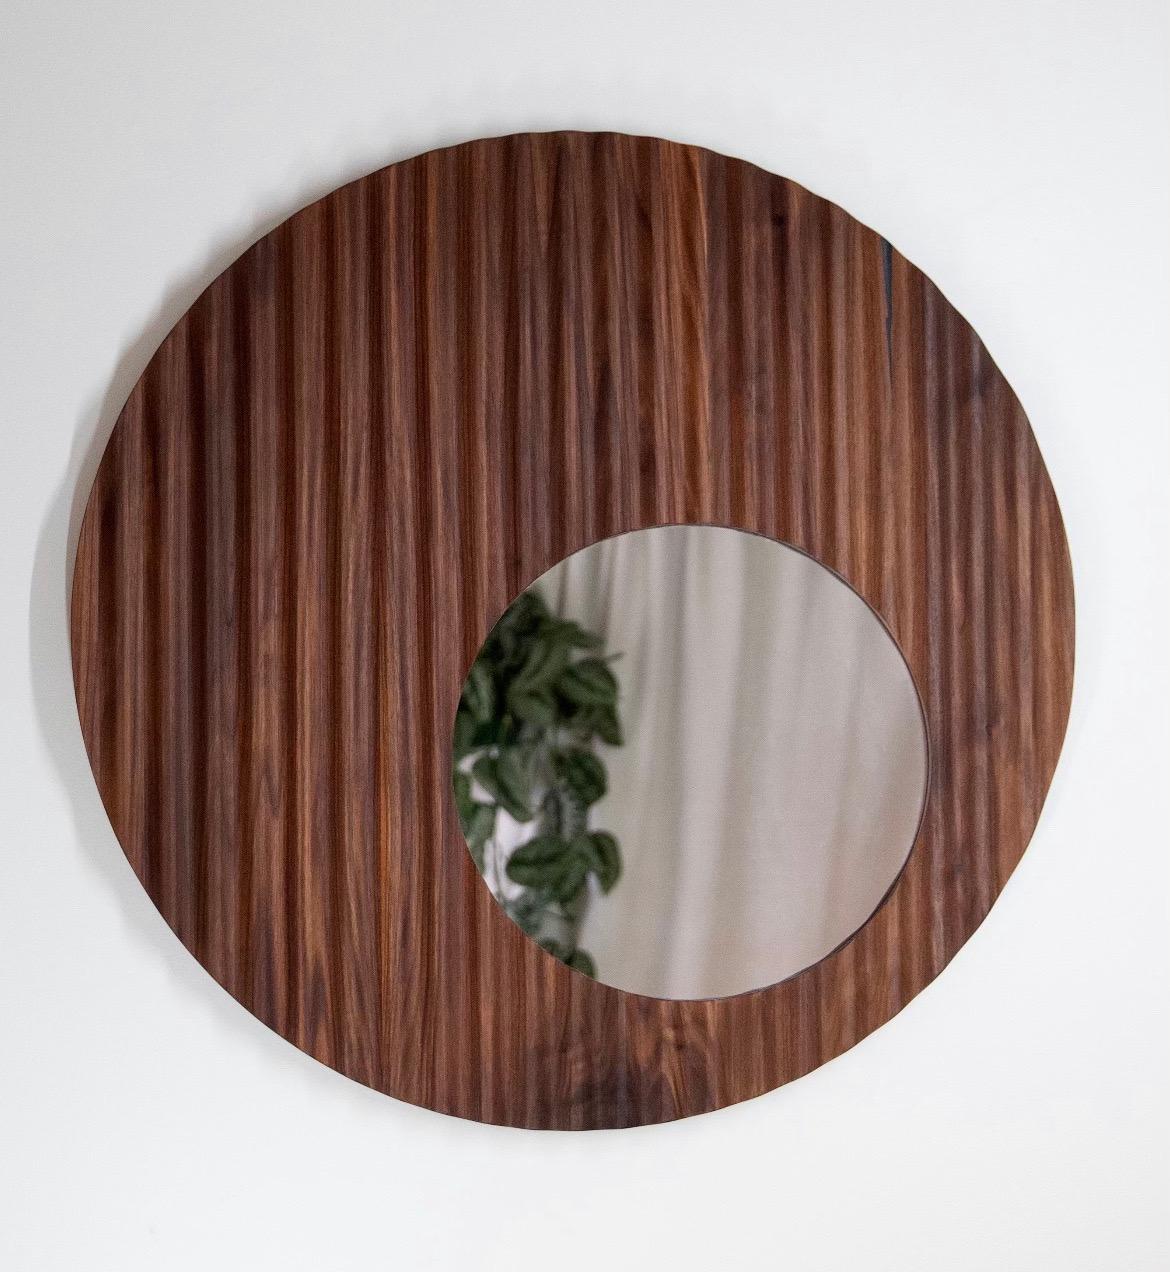 The Ruffle Mirror is designed by North Carolina  craftsman Travis Hyatt. This mirror can work seamlessly with any style interior. It captures light and shadows beautifully as it highlights the natural wood grain. It explores several layers of depth